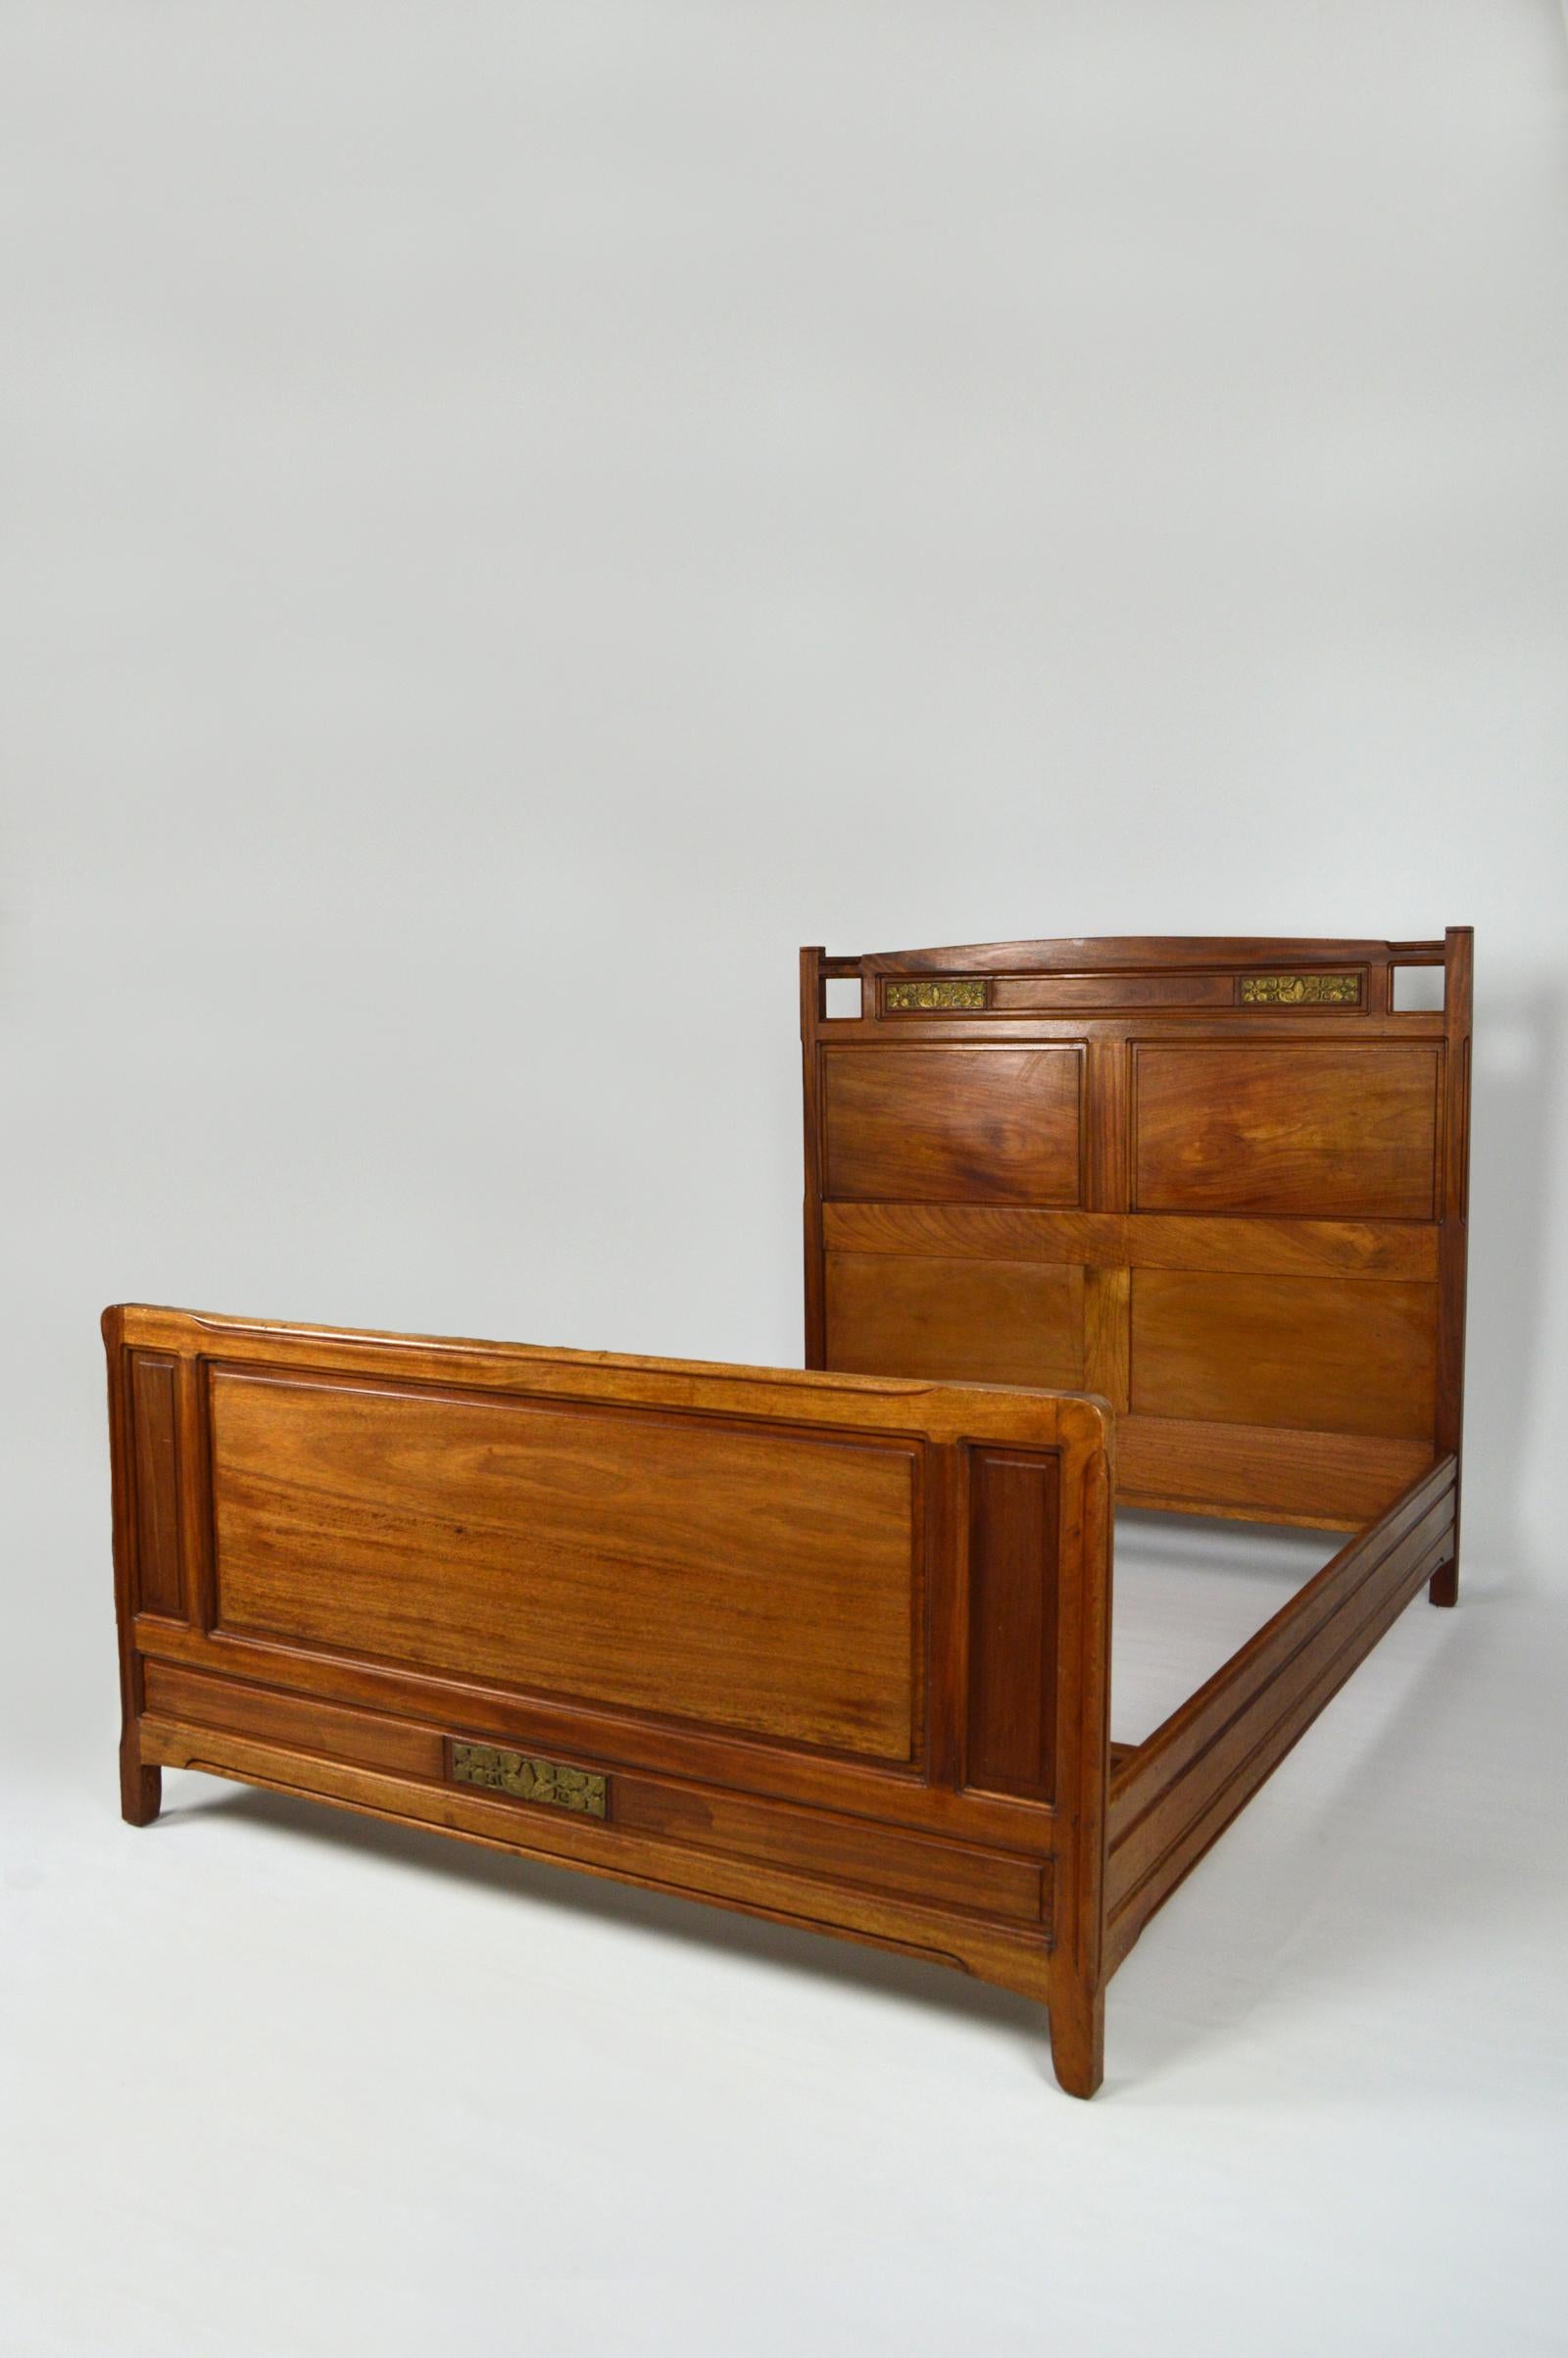 French Art Nouveau Mahogany Clematis Bedroom Set by Mathieu Gallerey, circa 1920 For Sale 3